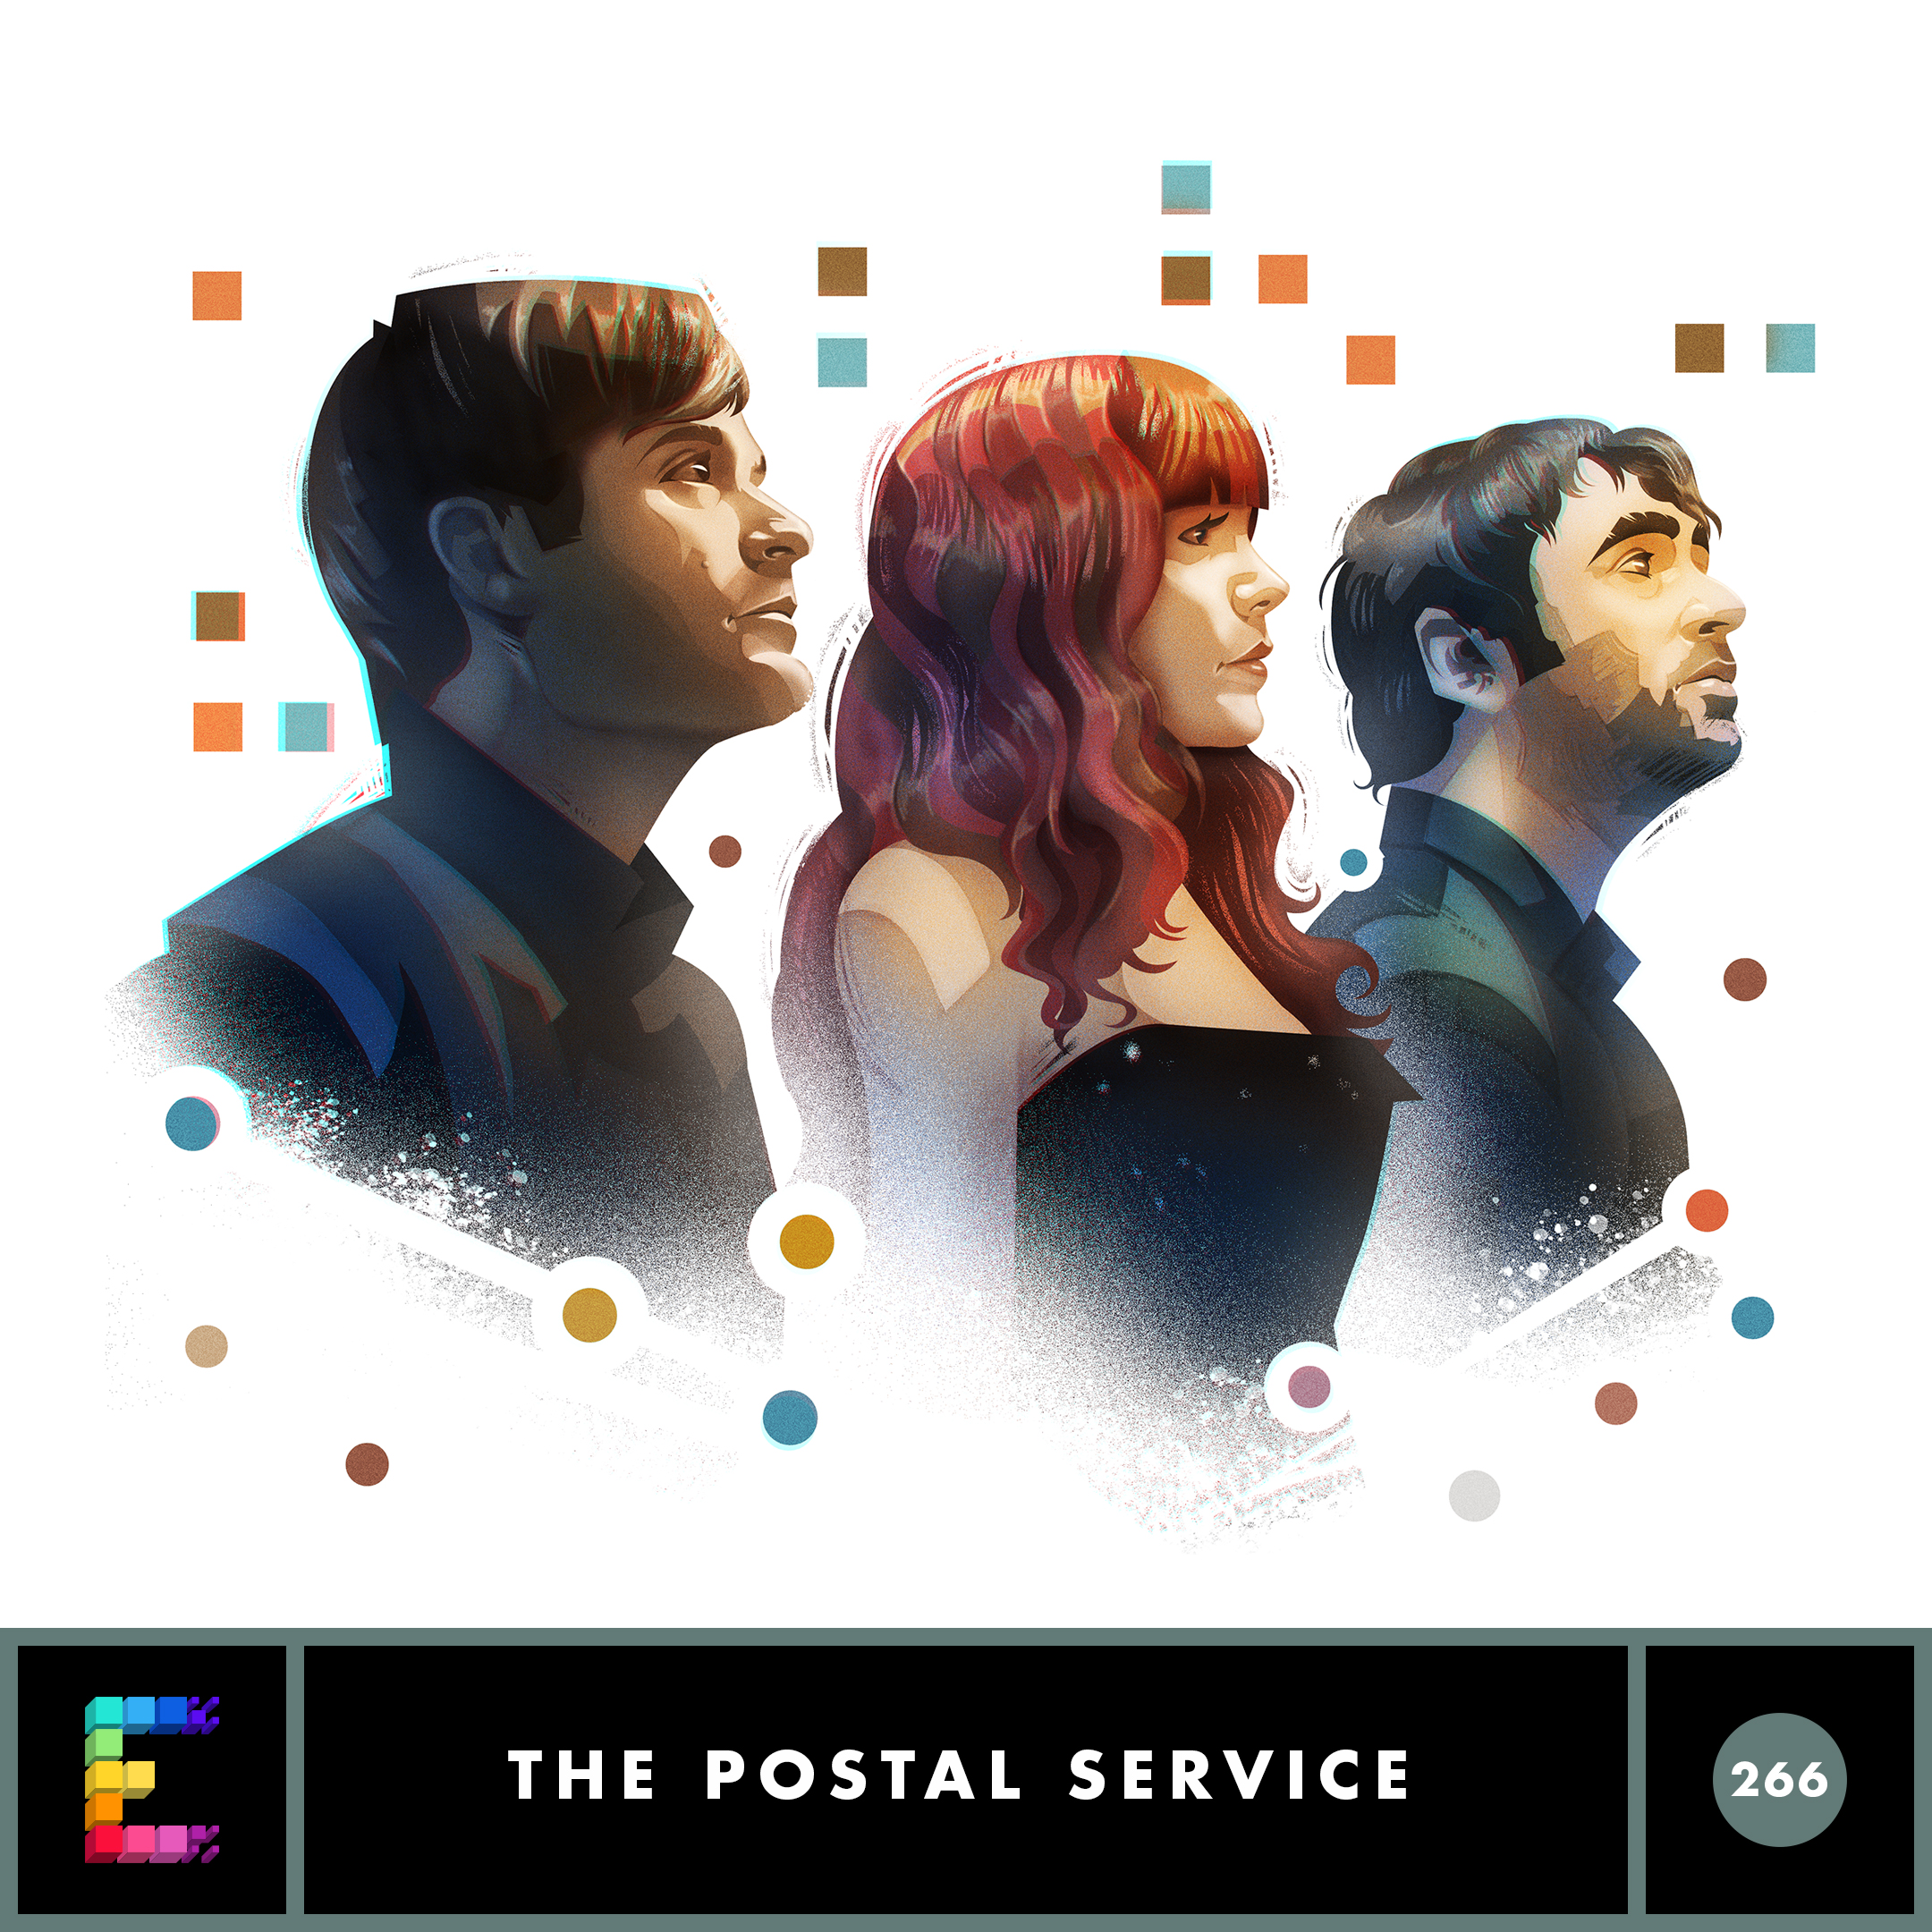 The Postal Service - The District Sleeps Alone Tonight (Deluxe Anniversary Edition)